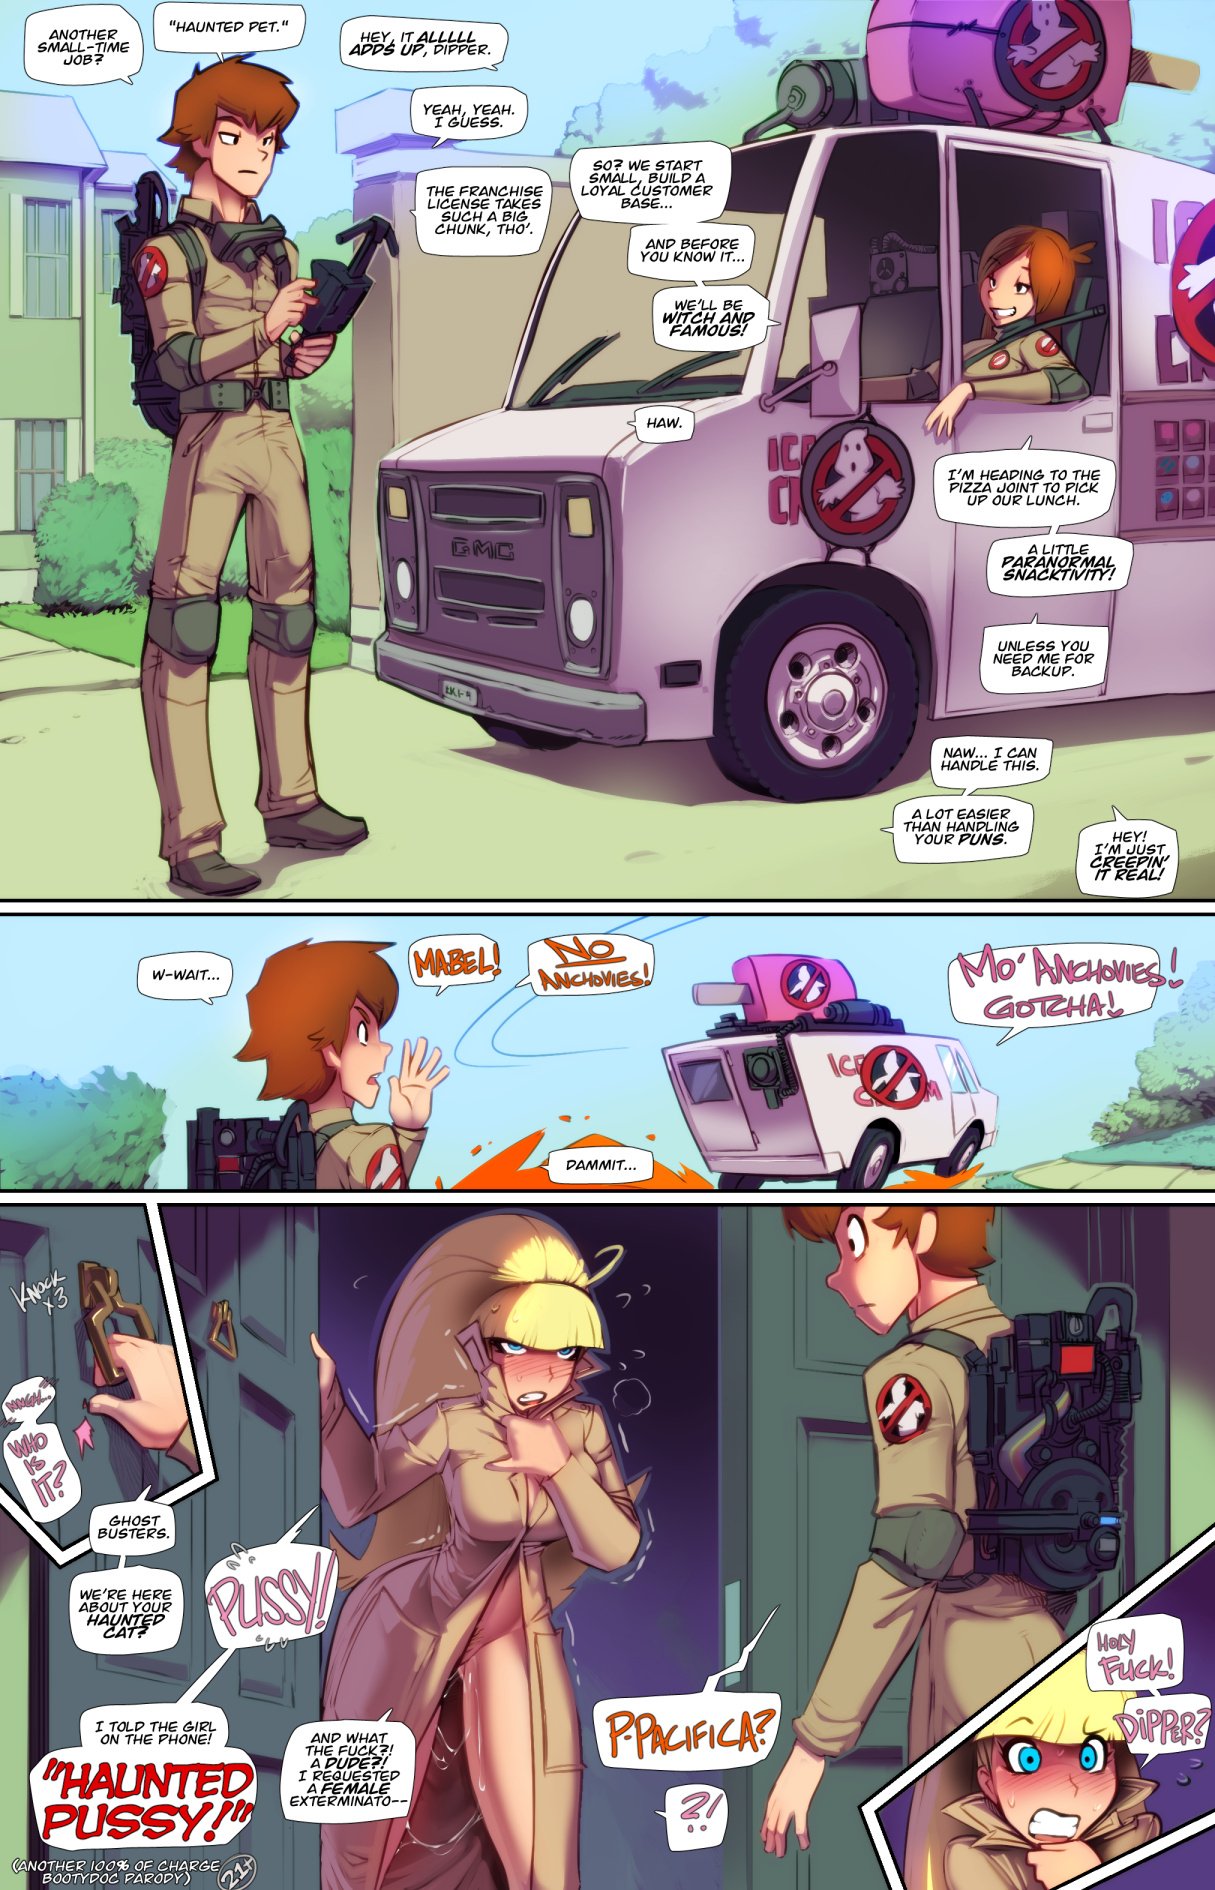 Haunted Pussy! (Various) [Fred Perry] - 1 . Haunted Pussy! - Chapter 1  (Gravity Falls) [Fred Perry] - AllPornComic